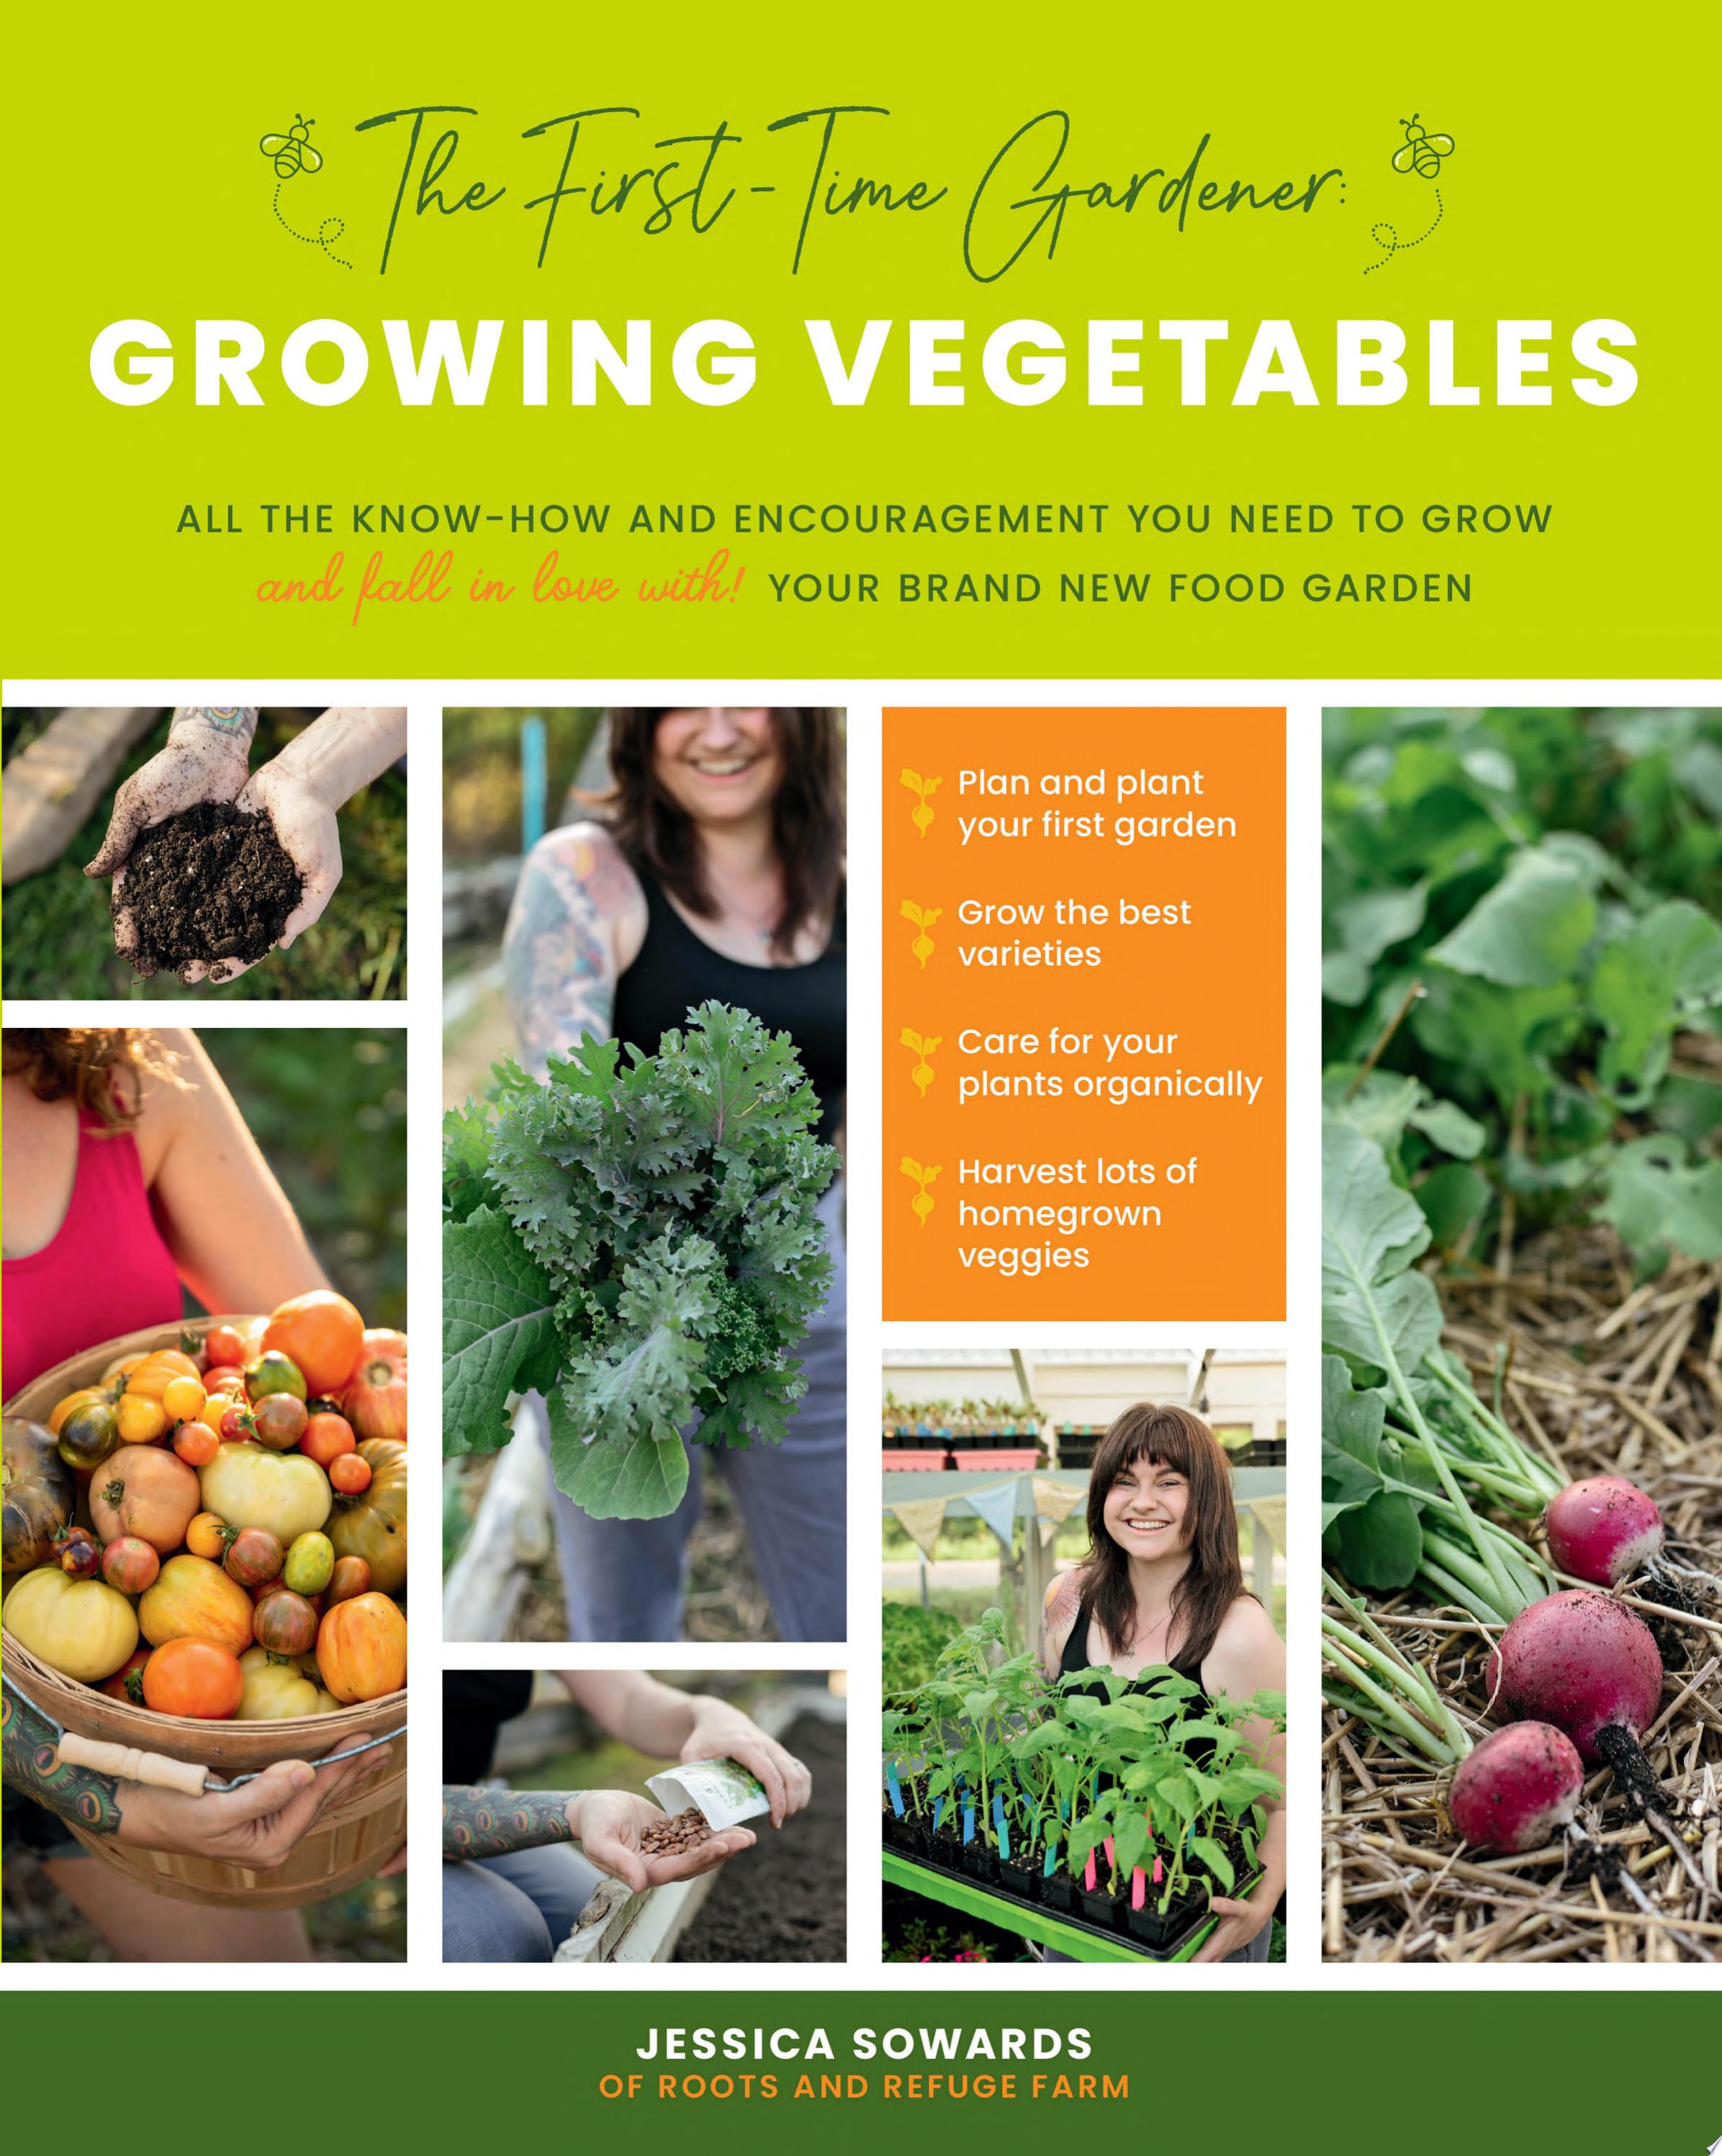 Image for "The First-time Gardener: Growing Vegetables"